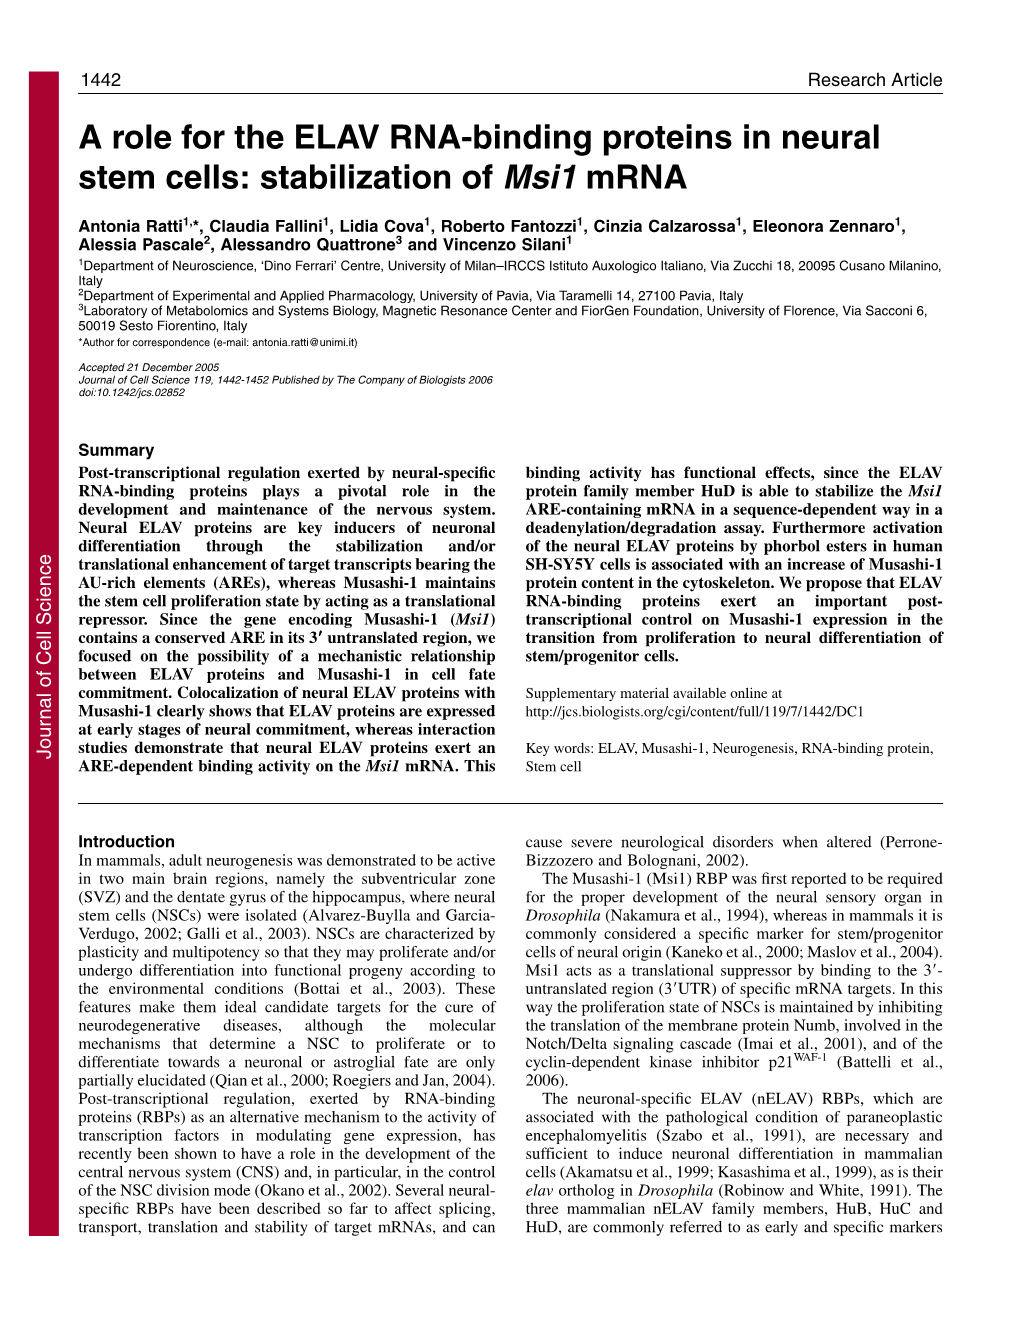 A Role for the ELAV RNA-Binding Proteins in Neural Stem Cells: Stabilization of Msi1 Mrna